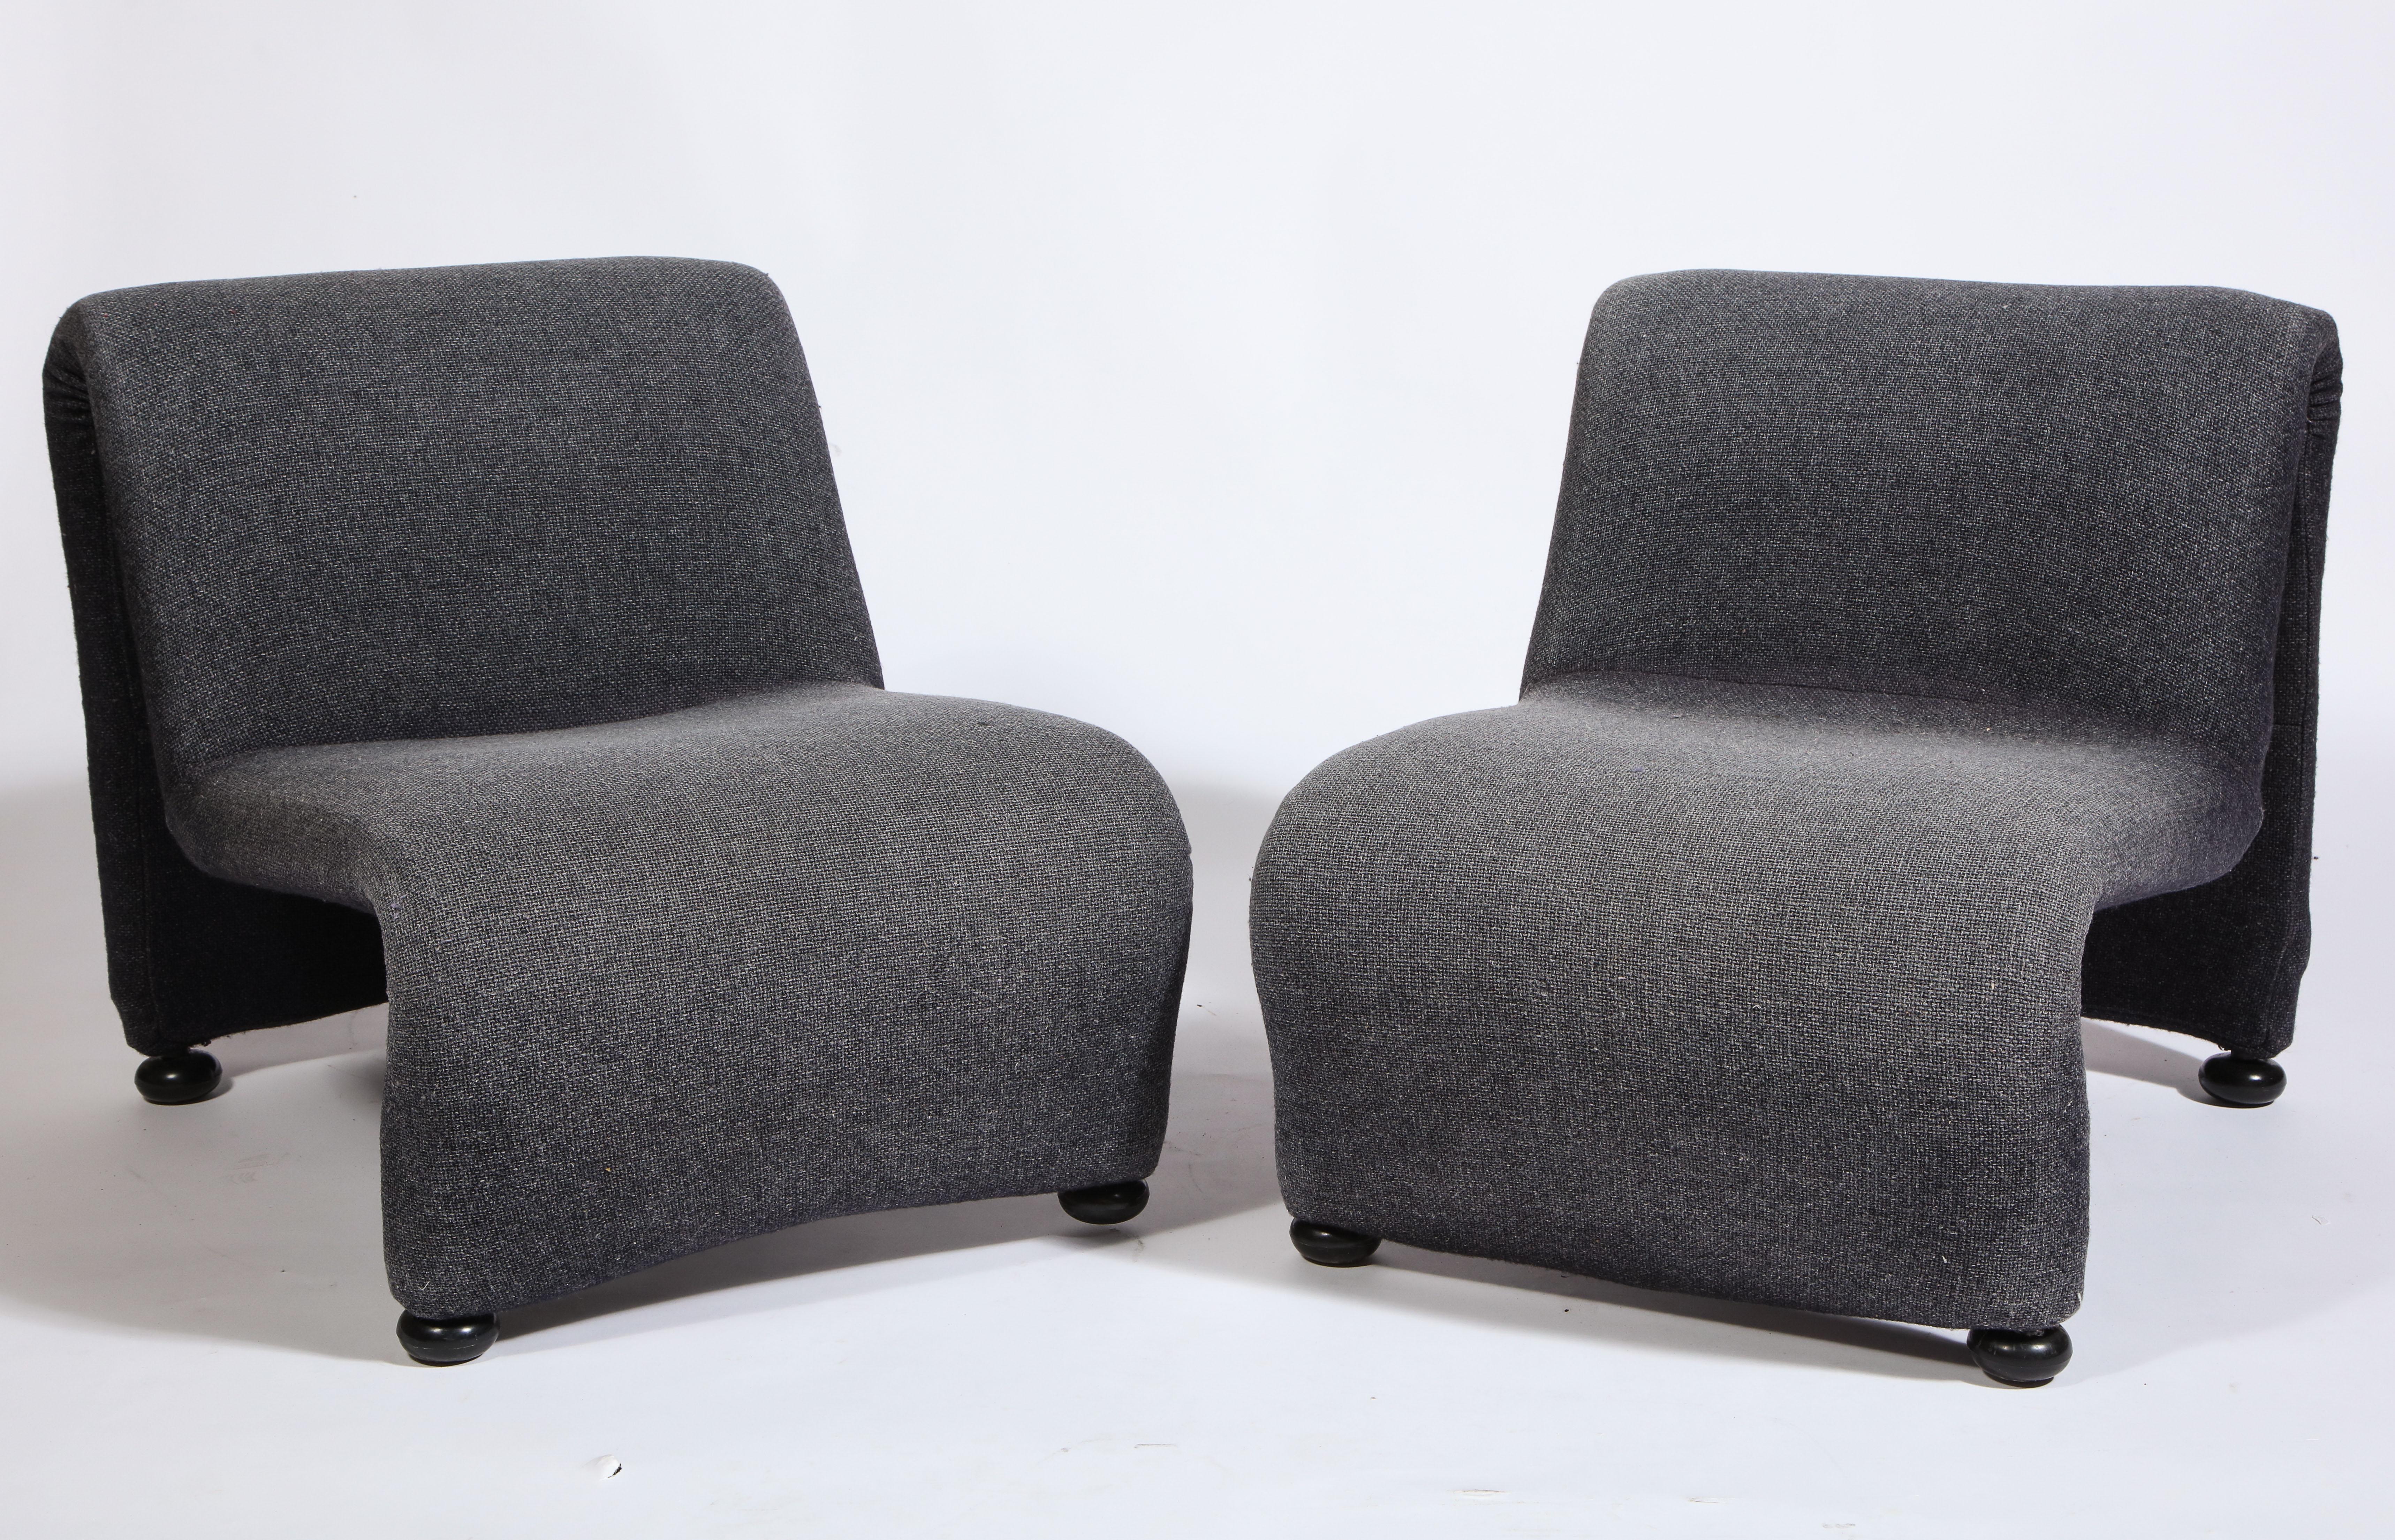 French Sculptural Etienne Fermigier Lounge Chairs, Grey, 1970s, France